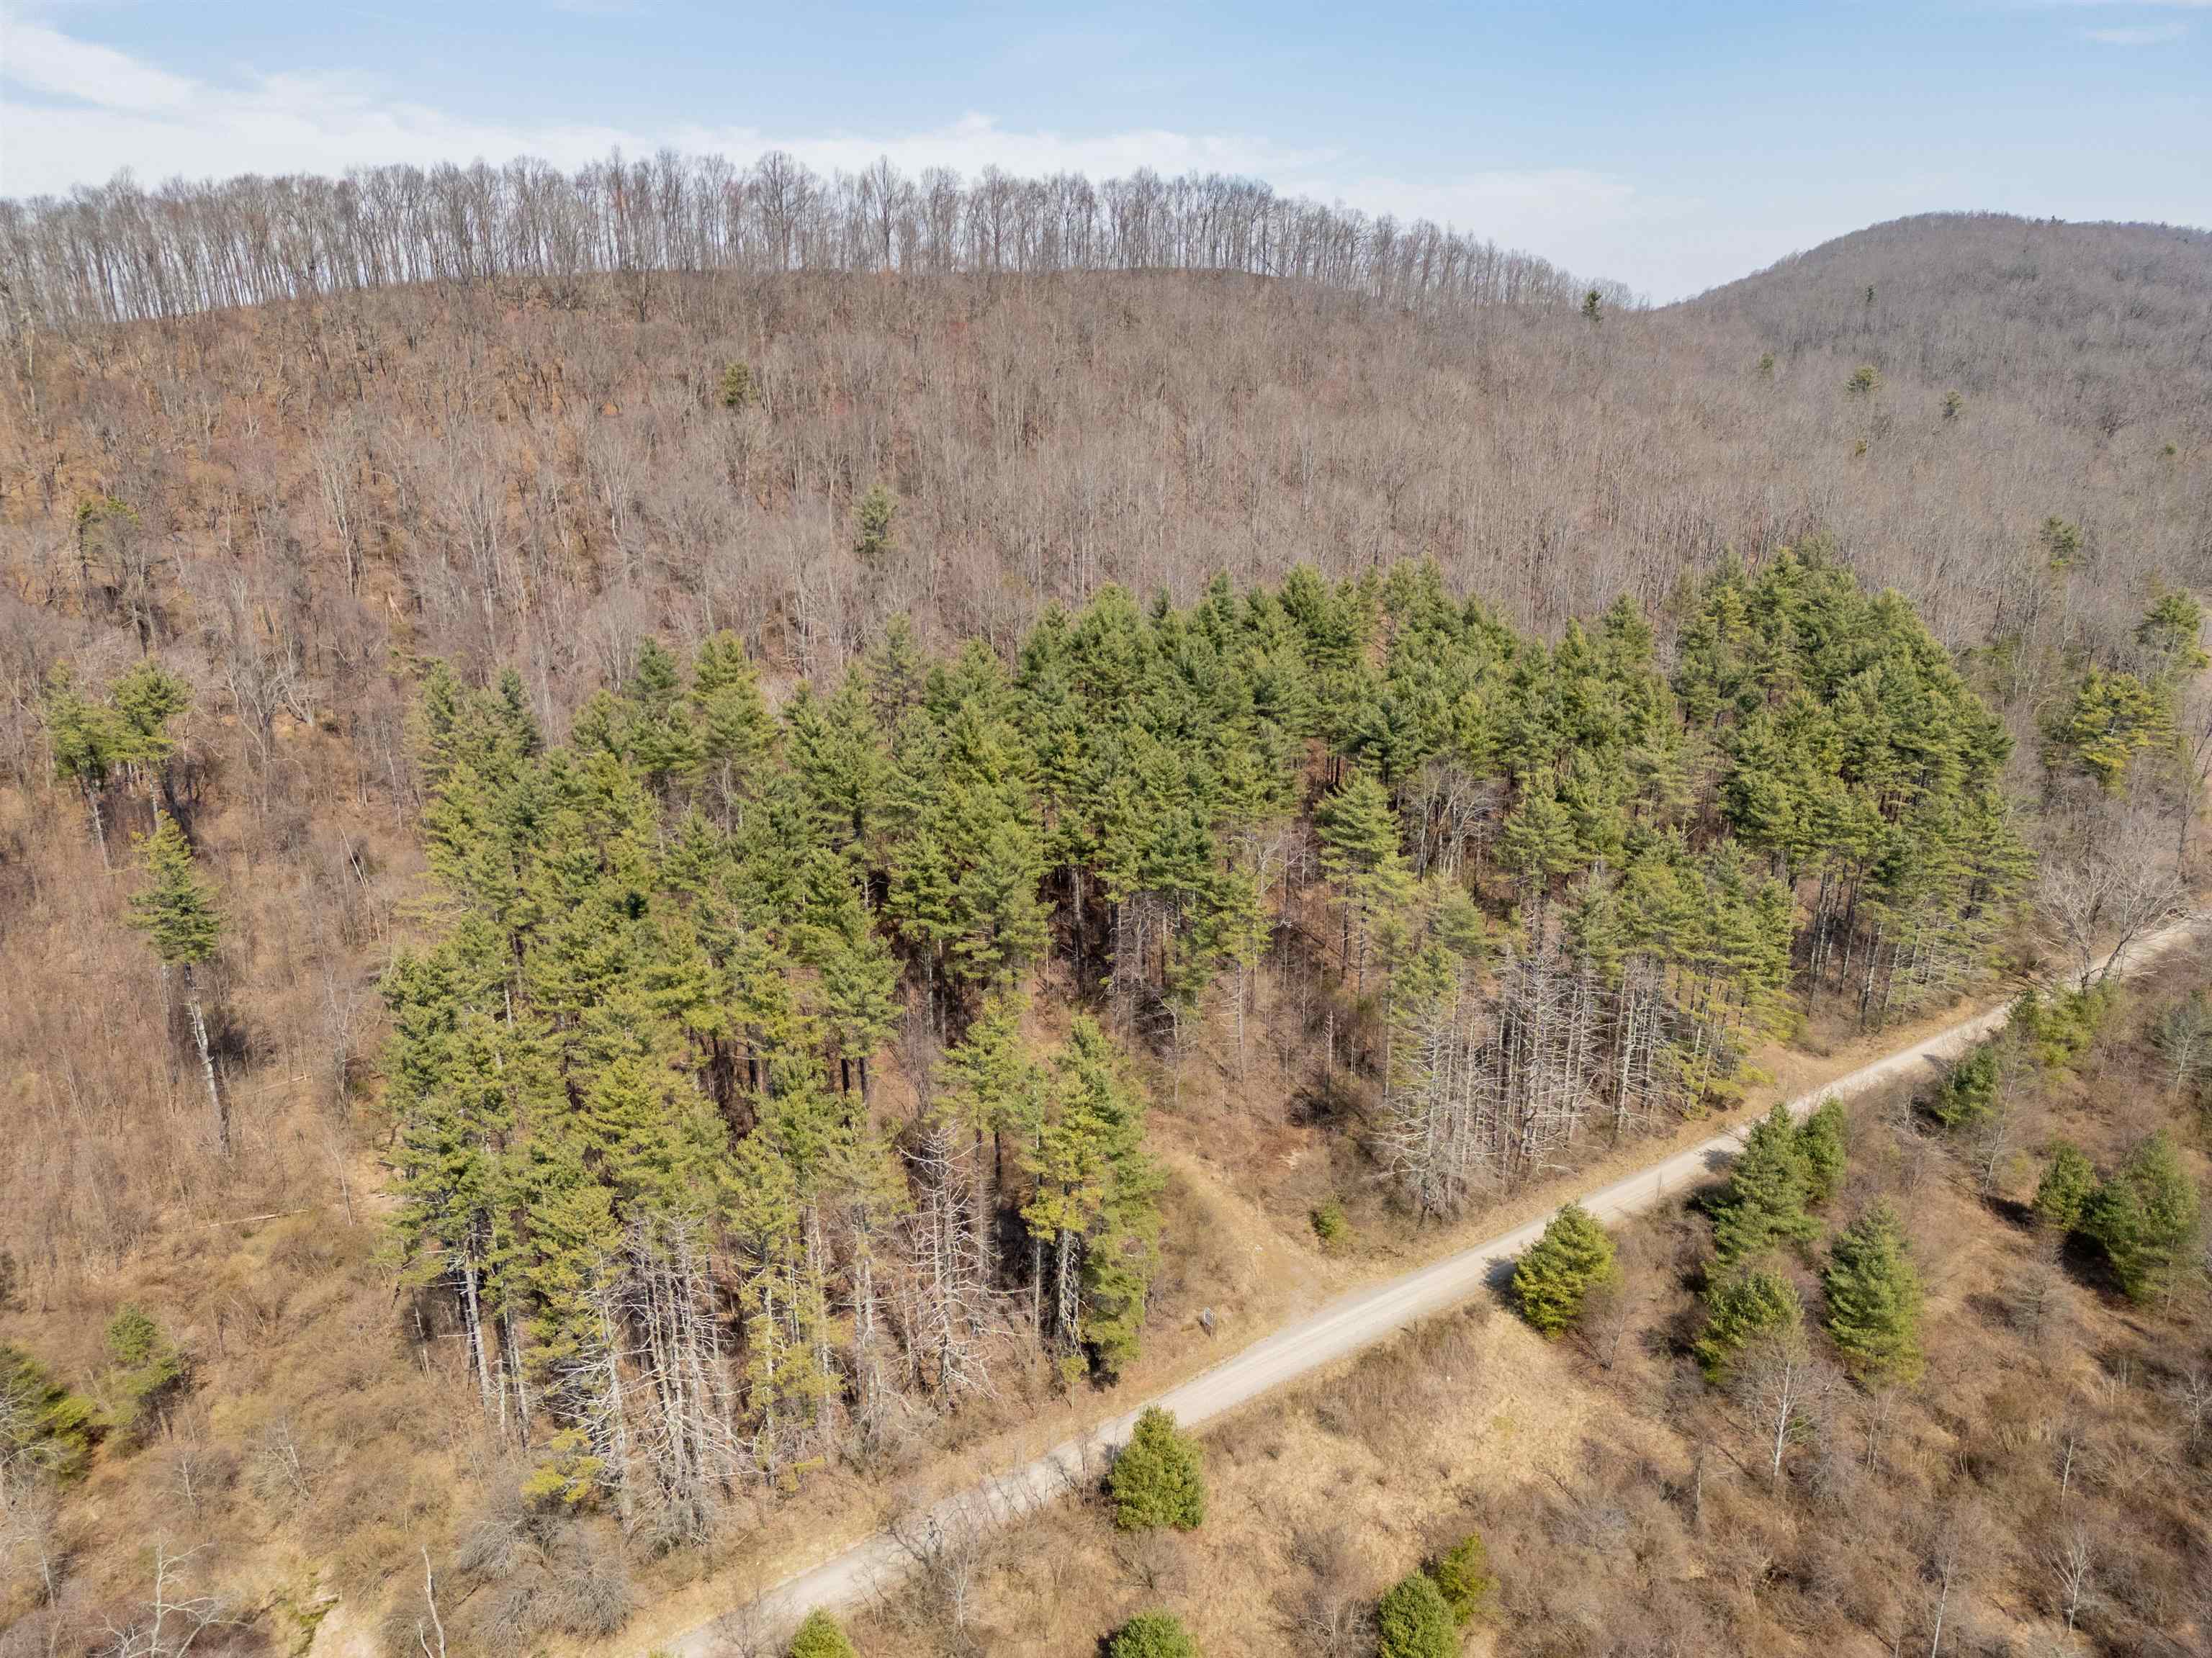 This is truly a once in a lifetime opportunity to develop a property along the Blue Ridge Parkway with no scenic easement.  With over 27 acres to develop and mountain top vistas, this property has a lot to offer.  Not looking to develop?  Say no more, build your Blue Ridge Parkway/Mountain home on this amazing 27 acres.  Walk off your front porch and within seconds you'll be on the BRP with your bike or motorcycle.